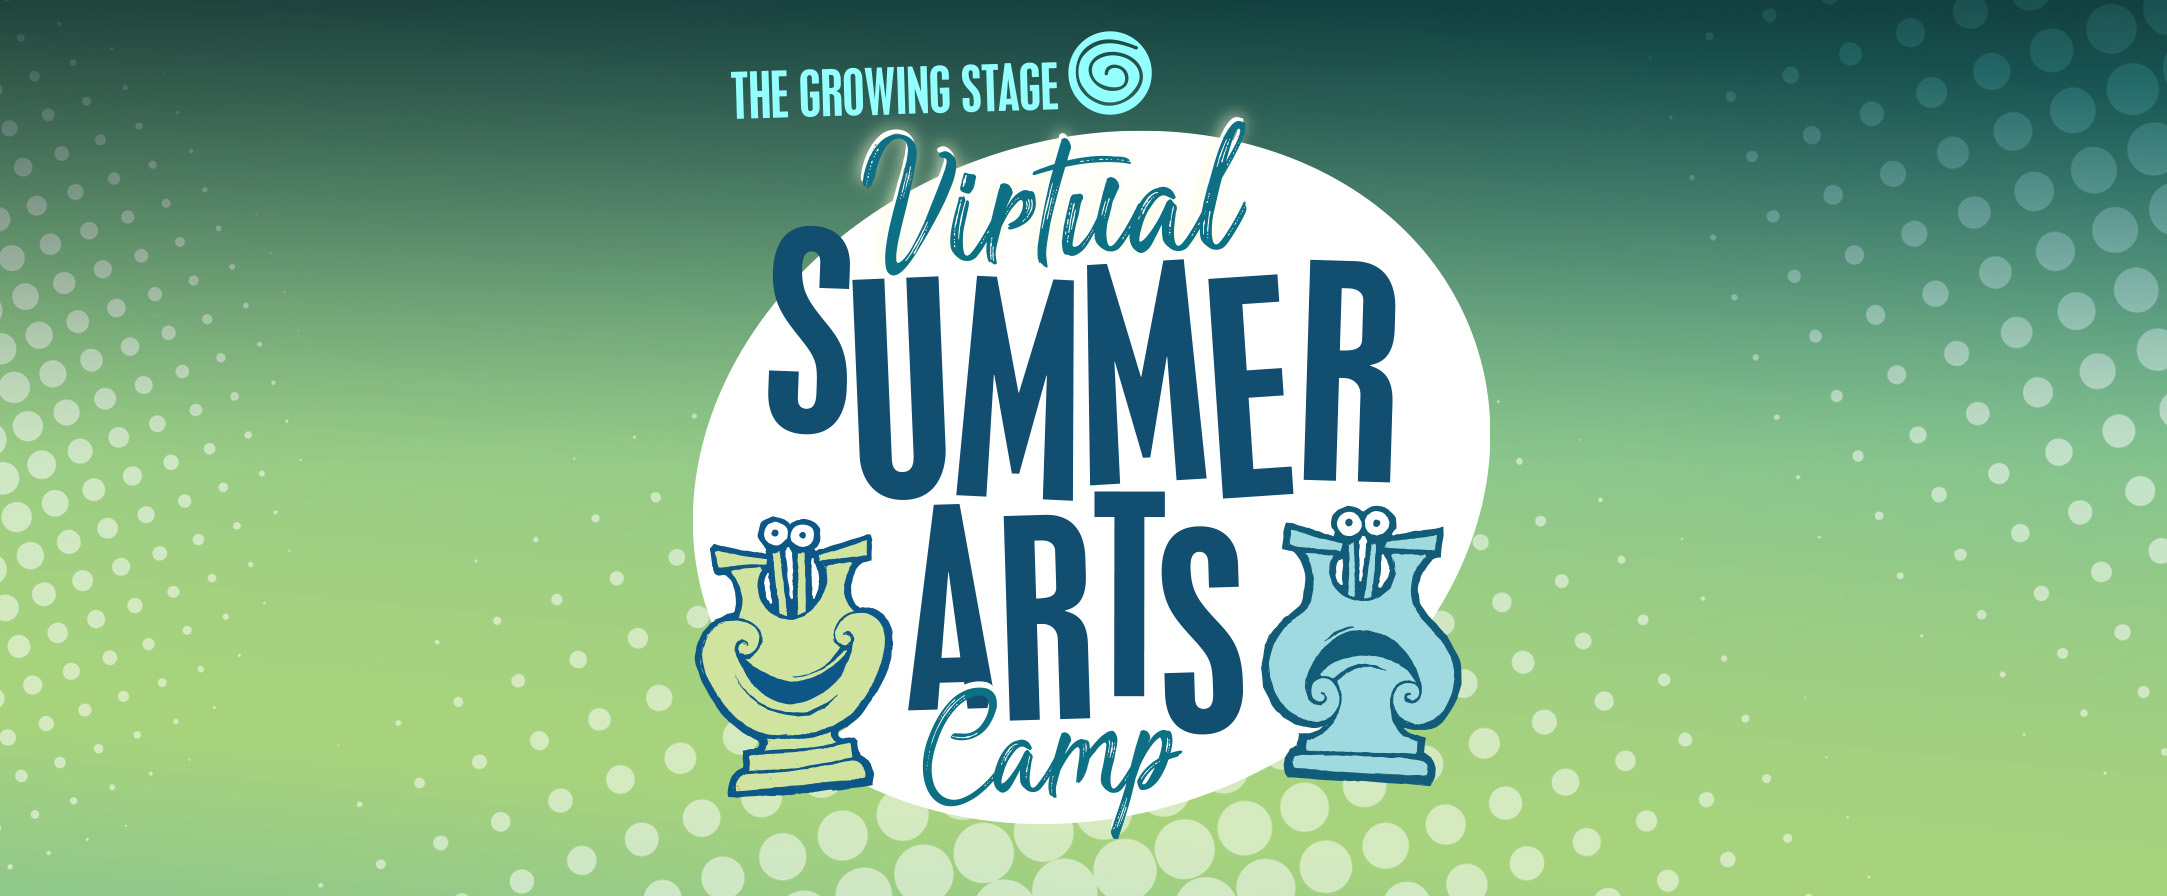 growing stage virtual summer arts day camp